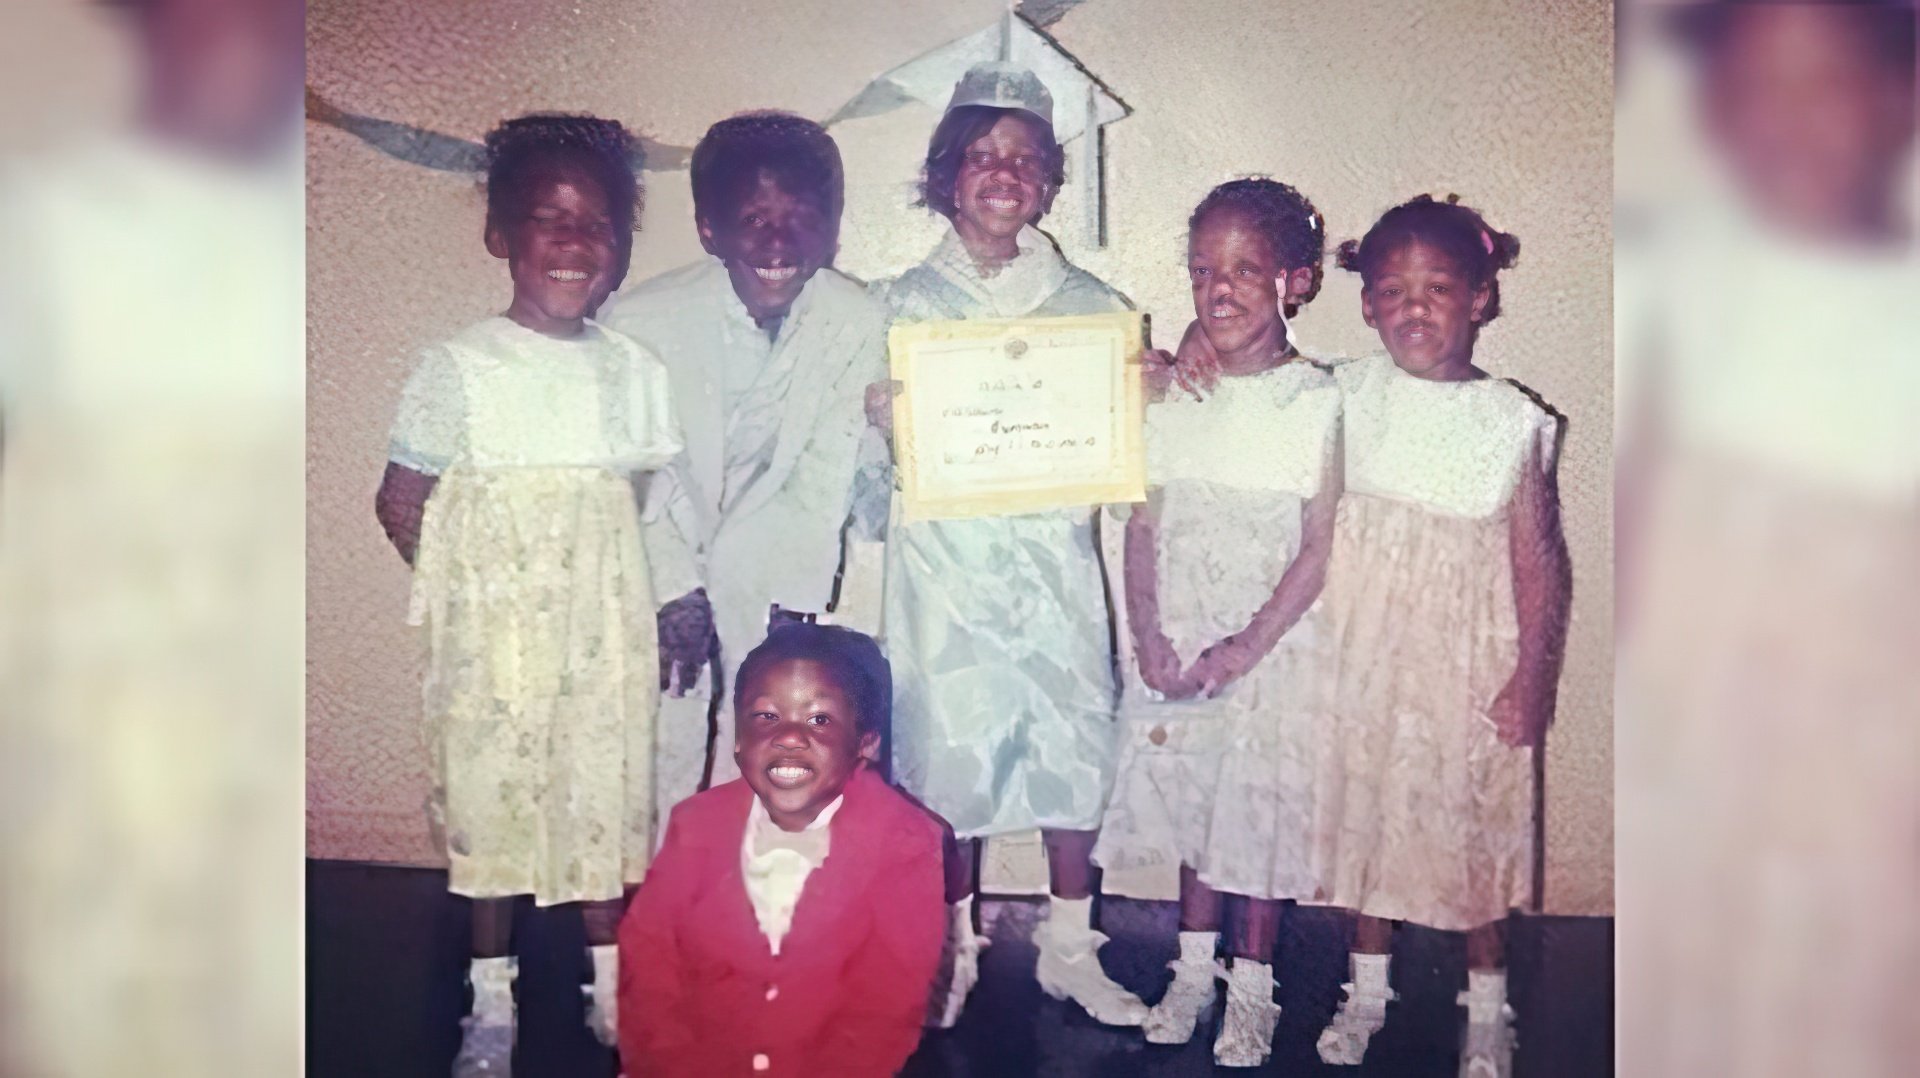 Yahya Abdul-Mateen II with his brothers and sisters in the childhood